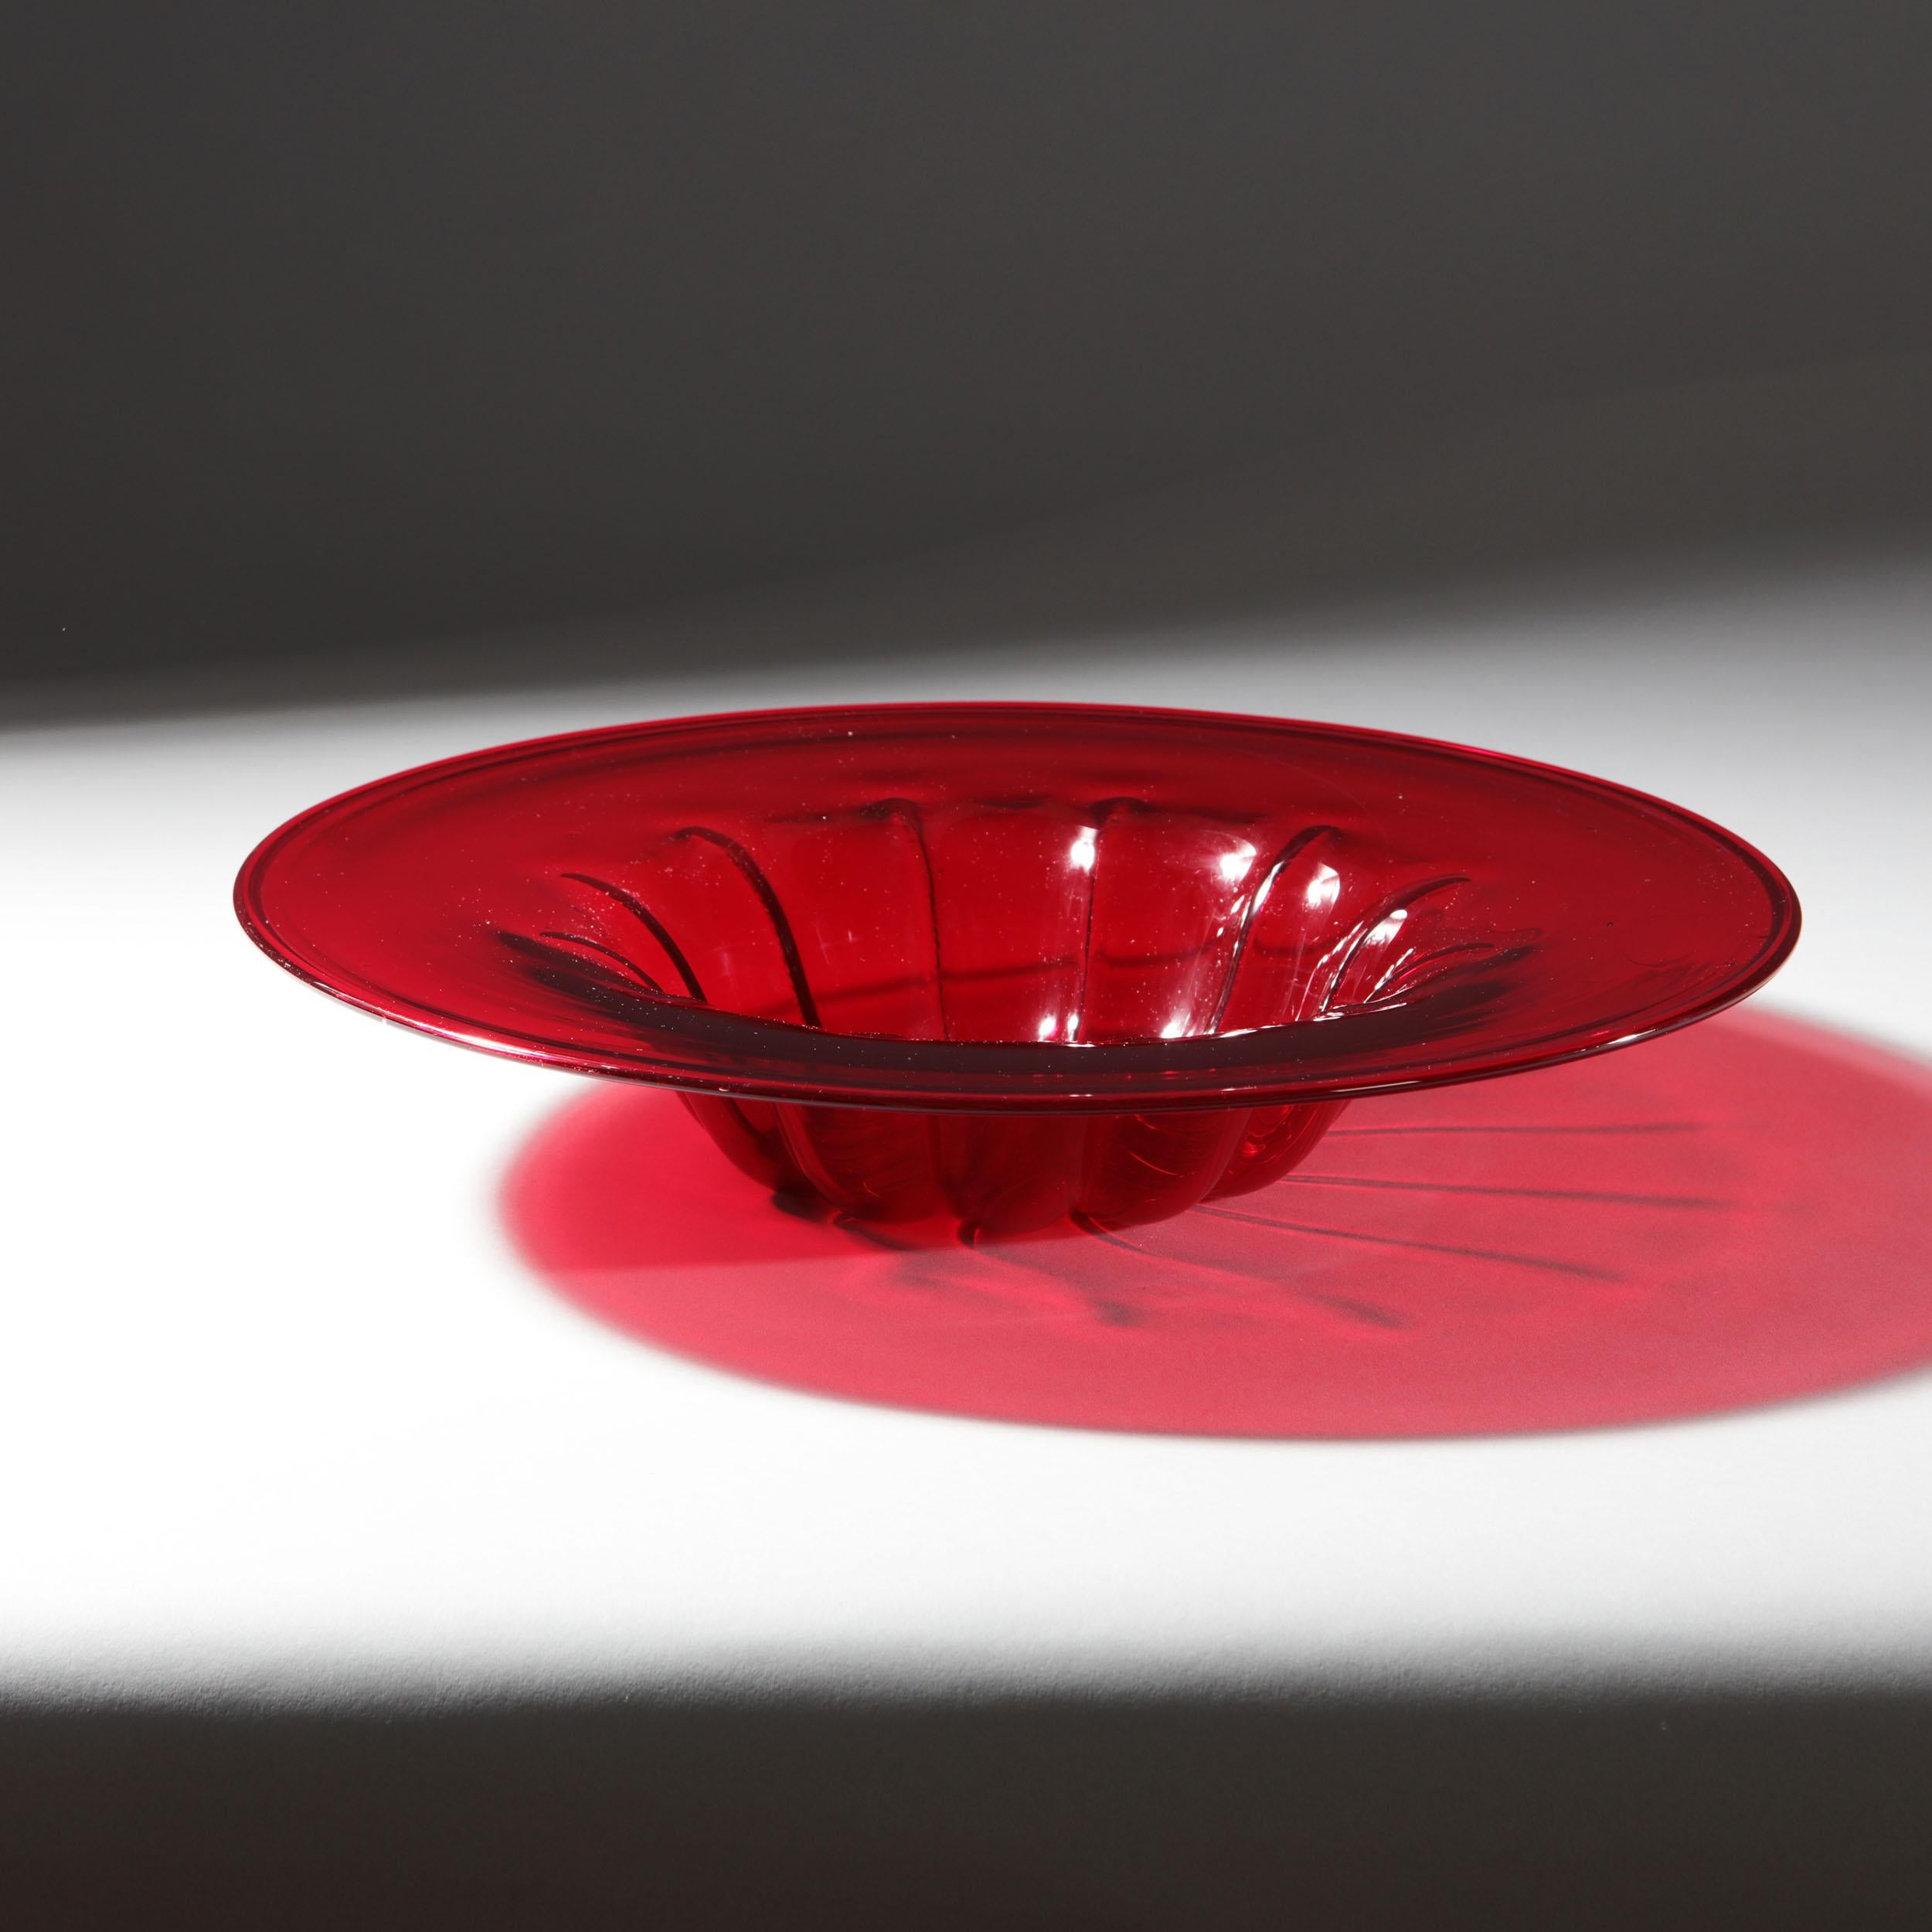 1950s Vibrant red molded Murano glass dish by the famous and most prestigious glass house Pauly & C.

This fine hand blown dish is modeled on a red Cardinals hat. The shaped bowl with ribbed sides and a slightly inverted base, the bowl outer rim